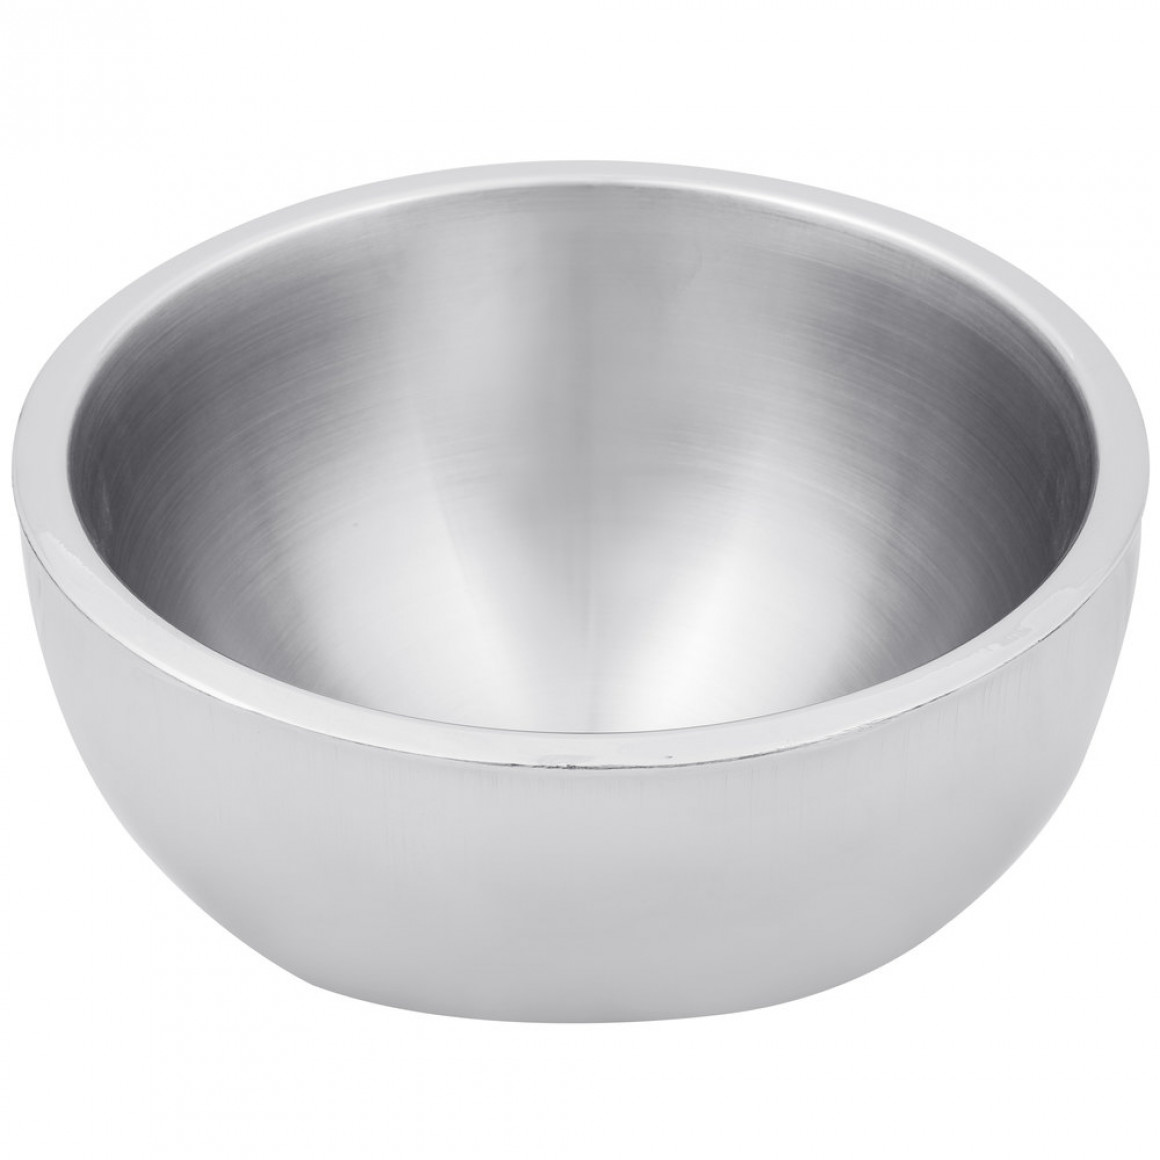 STAINLESS STEEL, SATIN BOWL, DOUBLE WALL, ANGLED, 108 OZ.